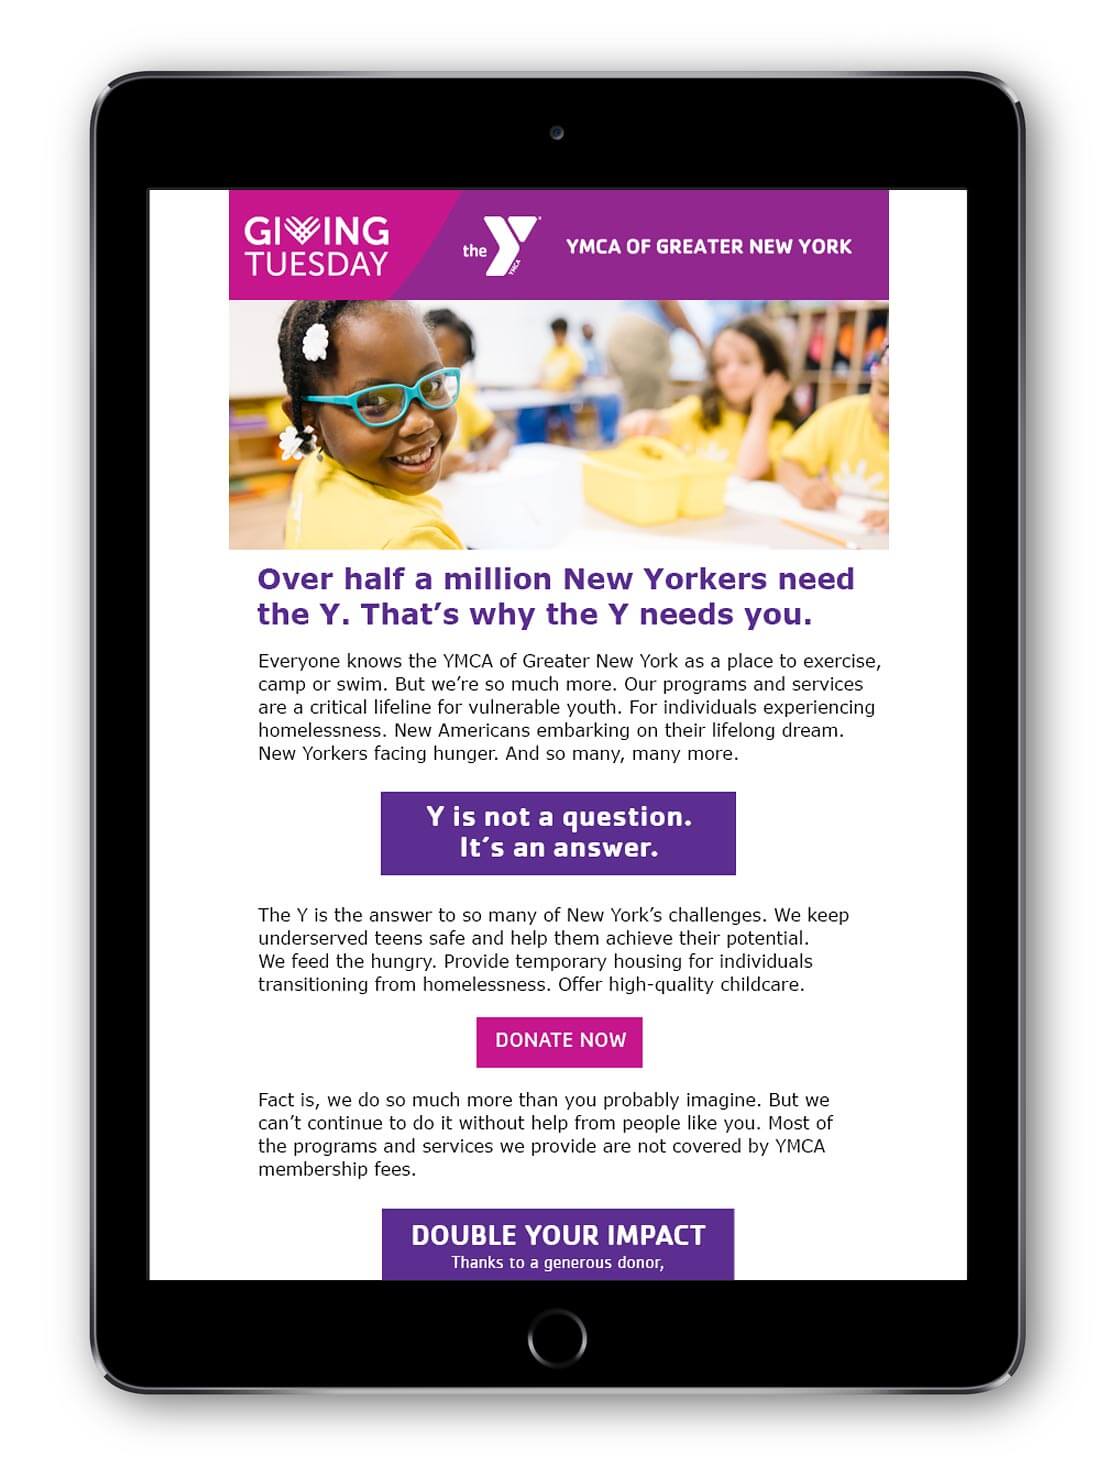 YMCA. Over half a million New Yorkers need the Y.